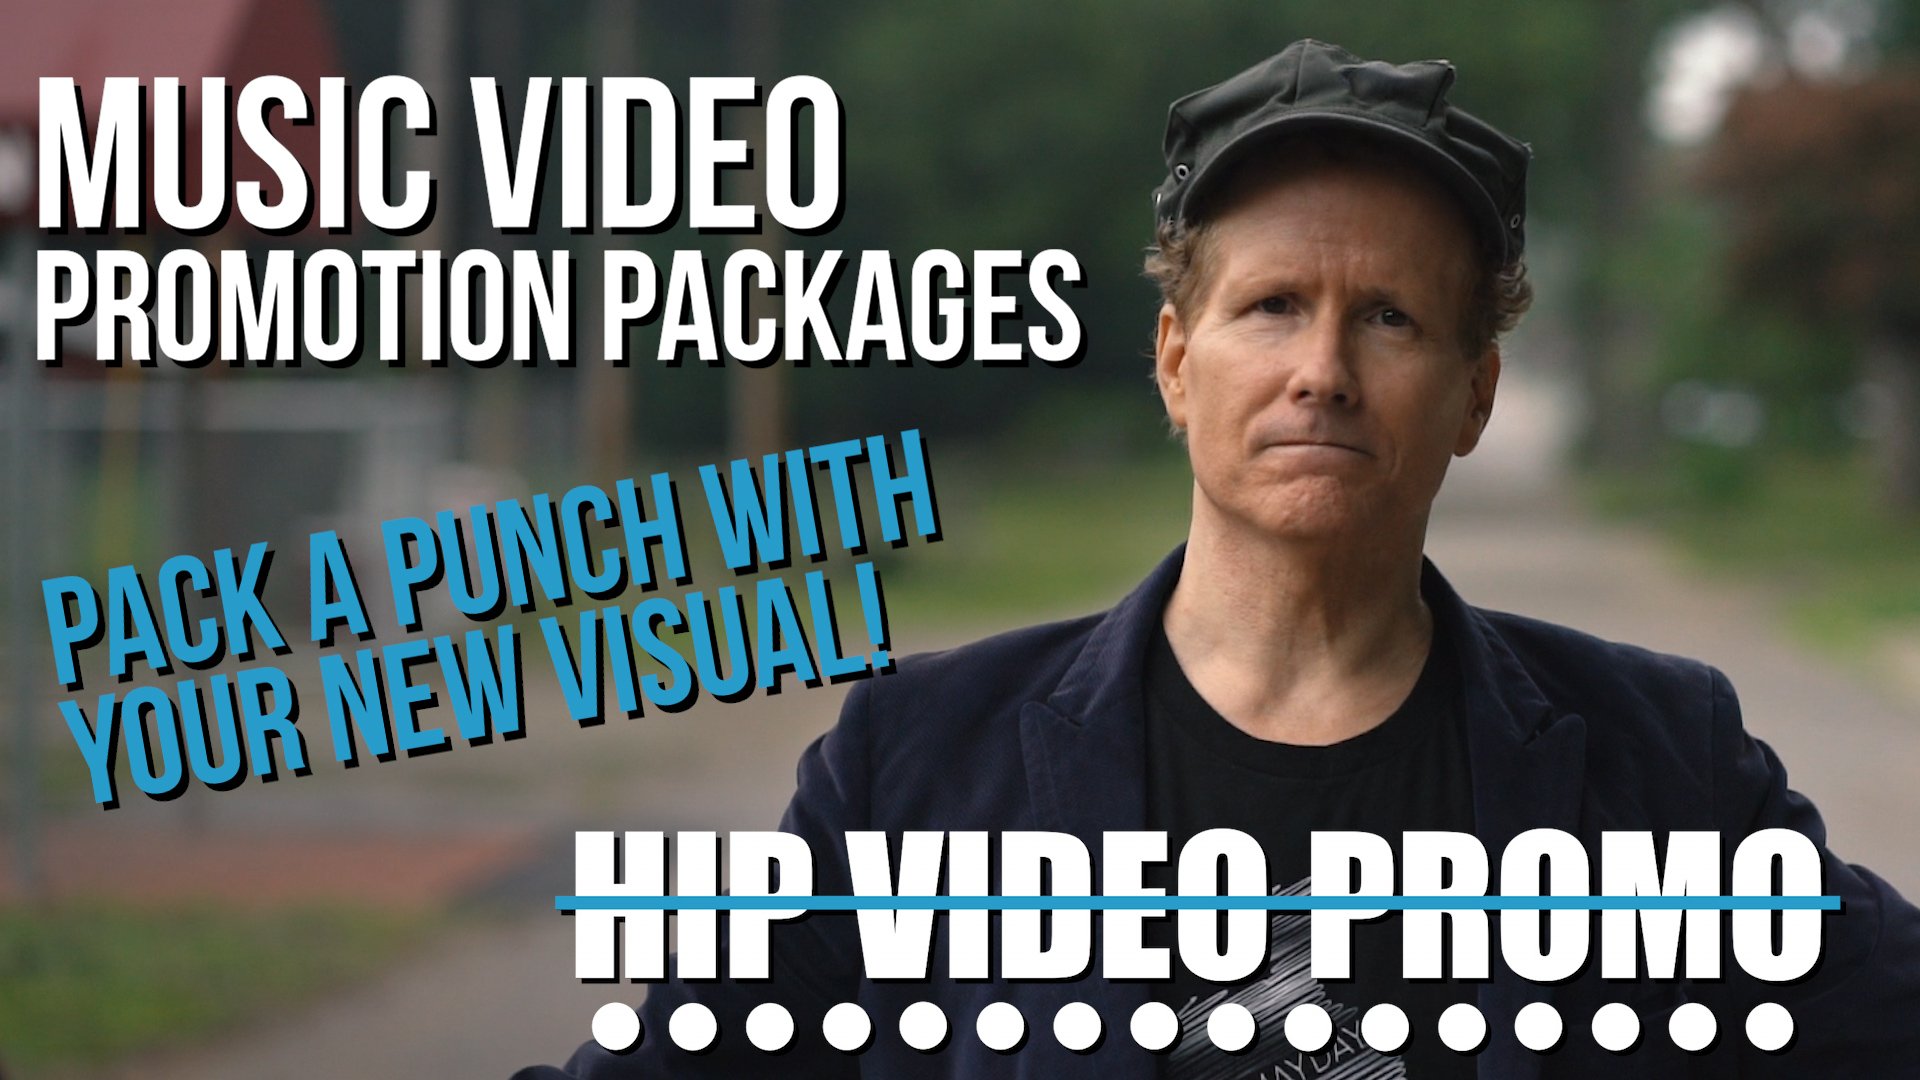 Music video promotion packages